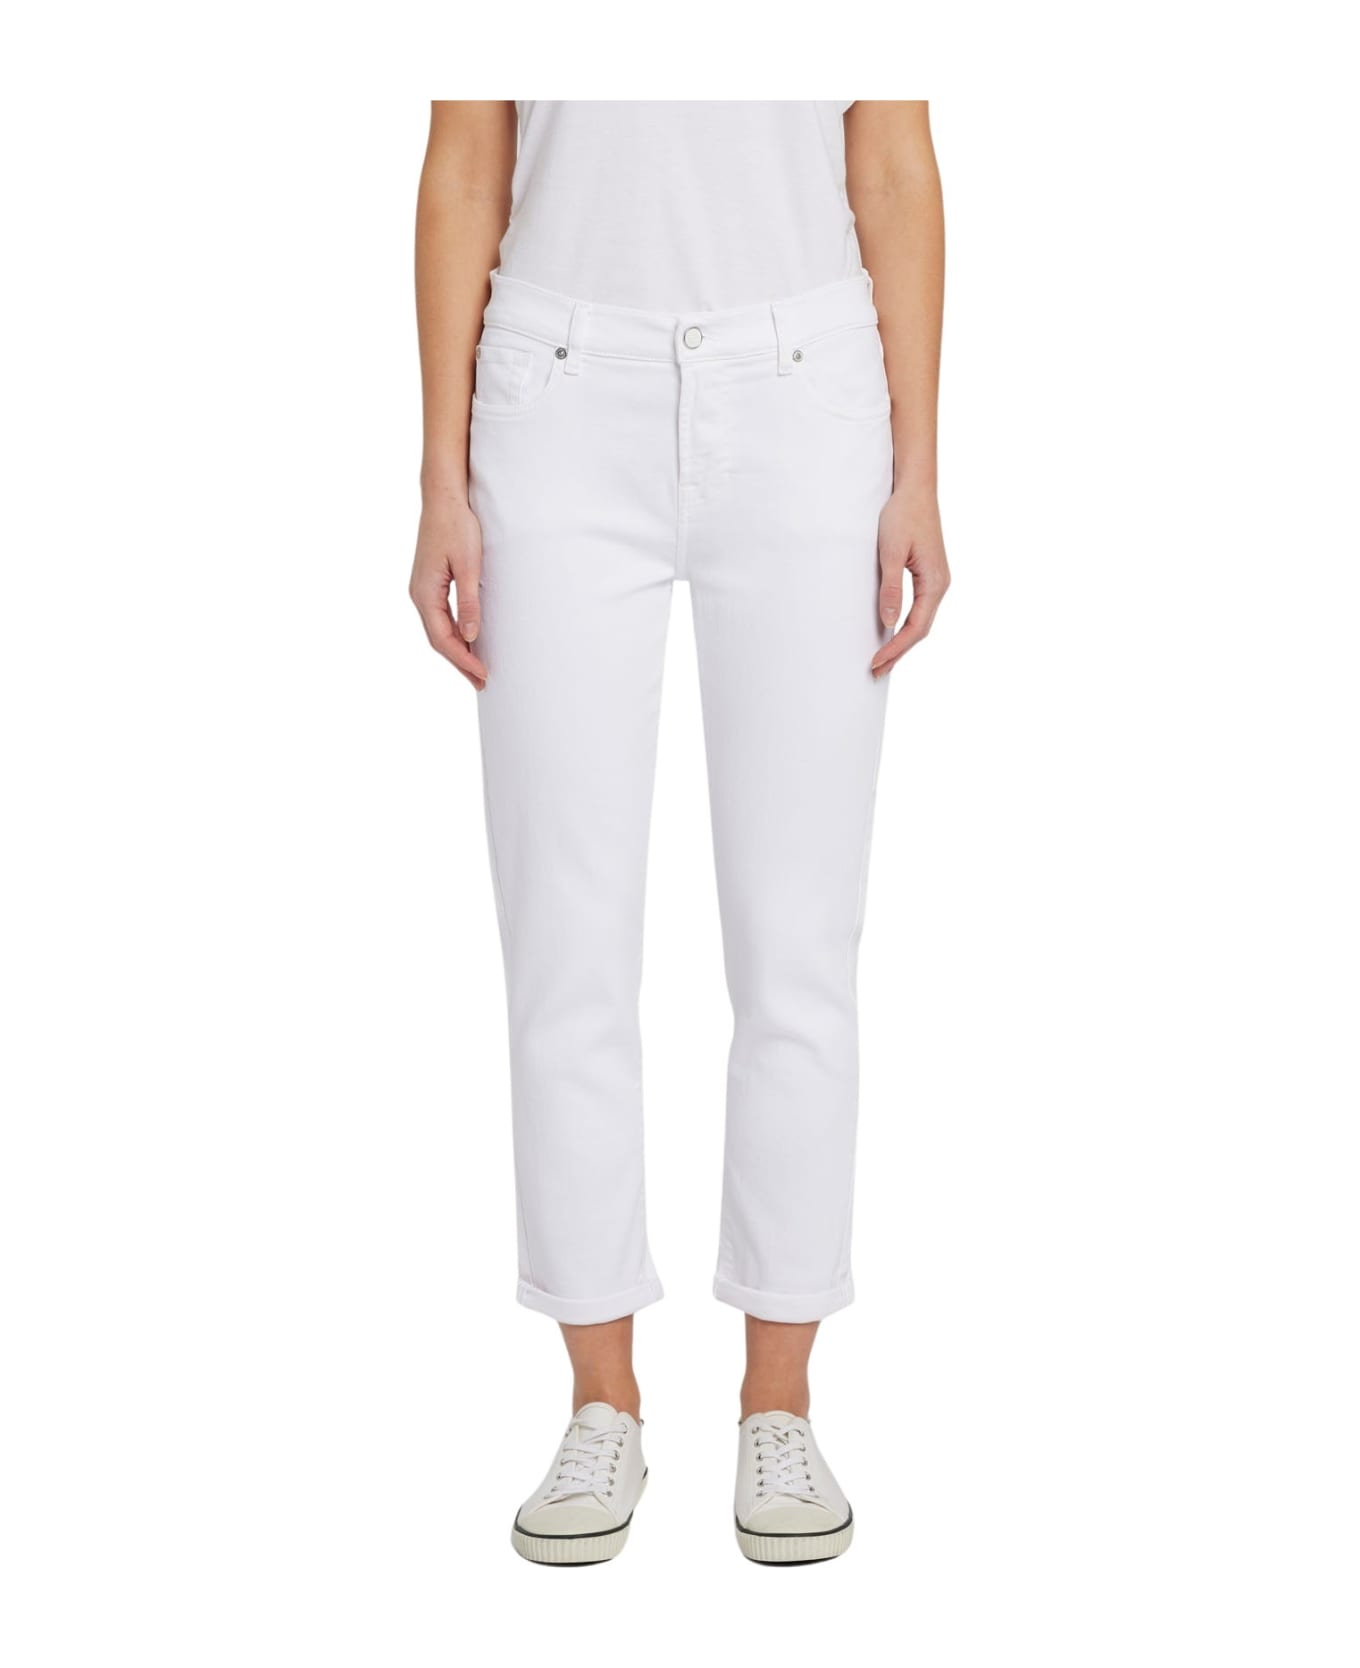 7 For All Mankind Josefina Luxe Vintage Soleil - White デニム